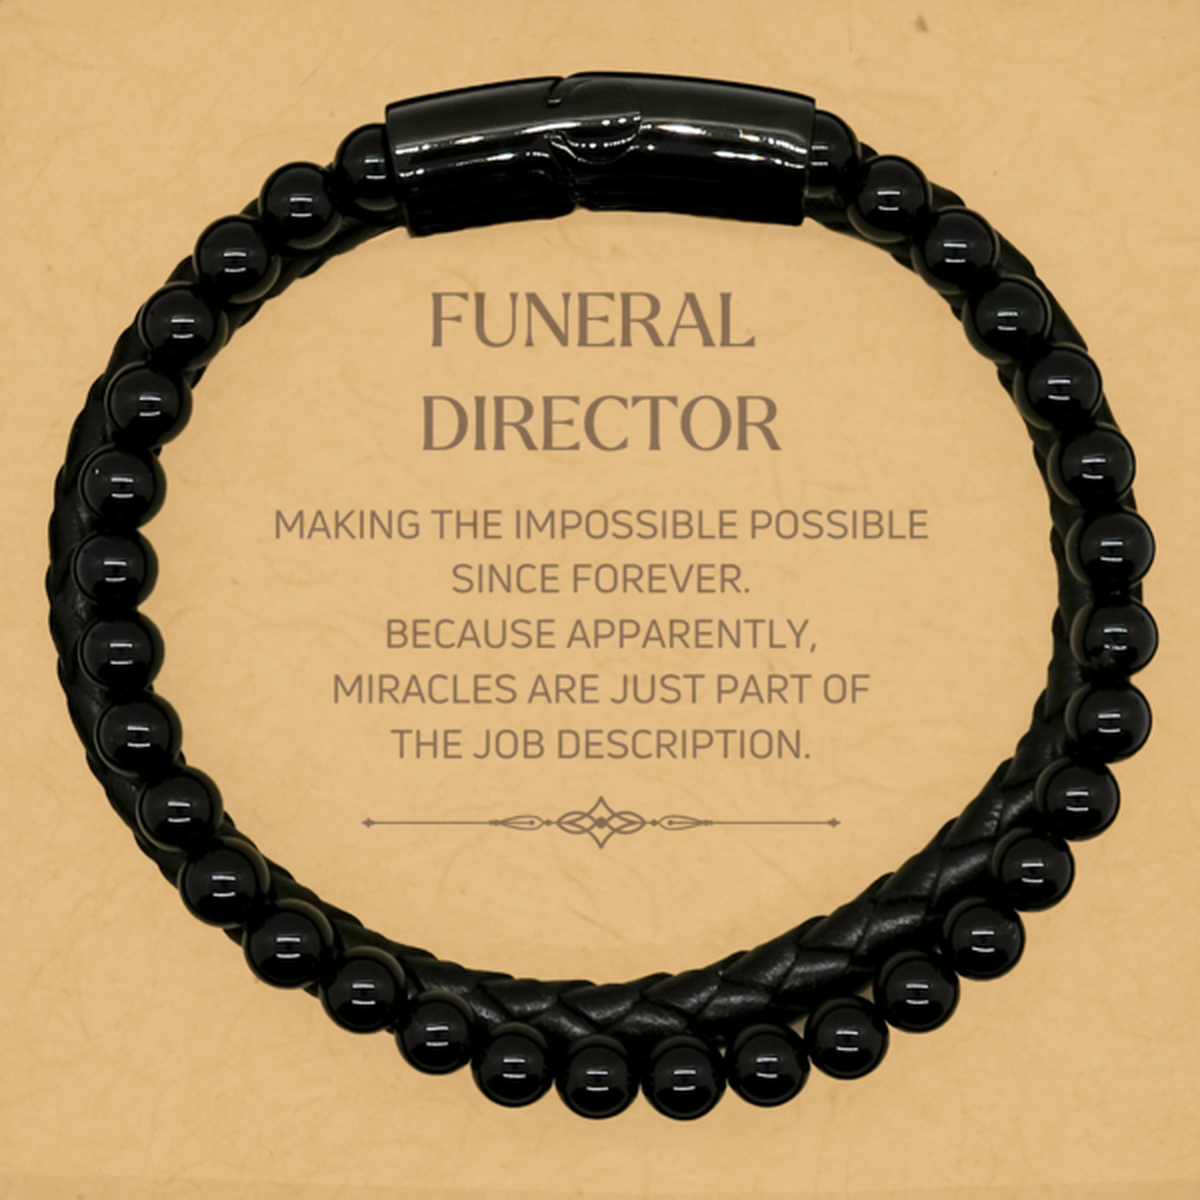 Funny Funeral Director Gifts, Miracles are just part of the job description, Inspirational Birthday Stone Leather Bracelets For Funeral Director, Men, Women, Coworkers, Friends, Boss